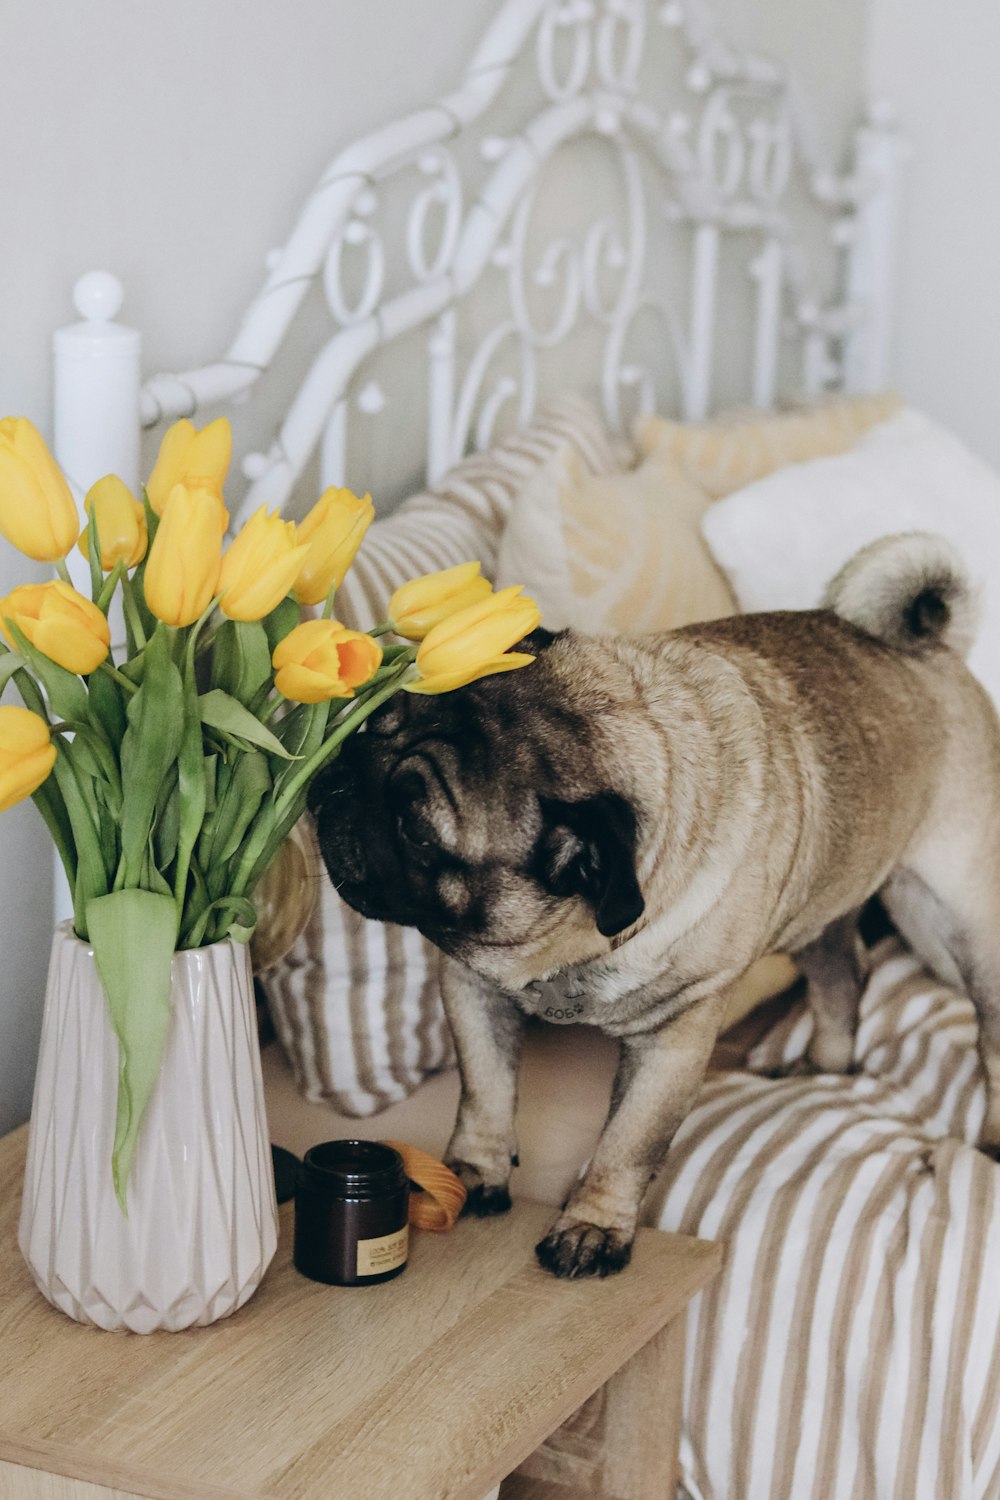 a pug standing on a bed next to a vase with yellow flowers